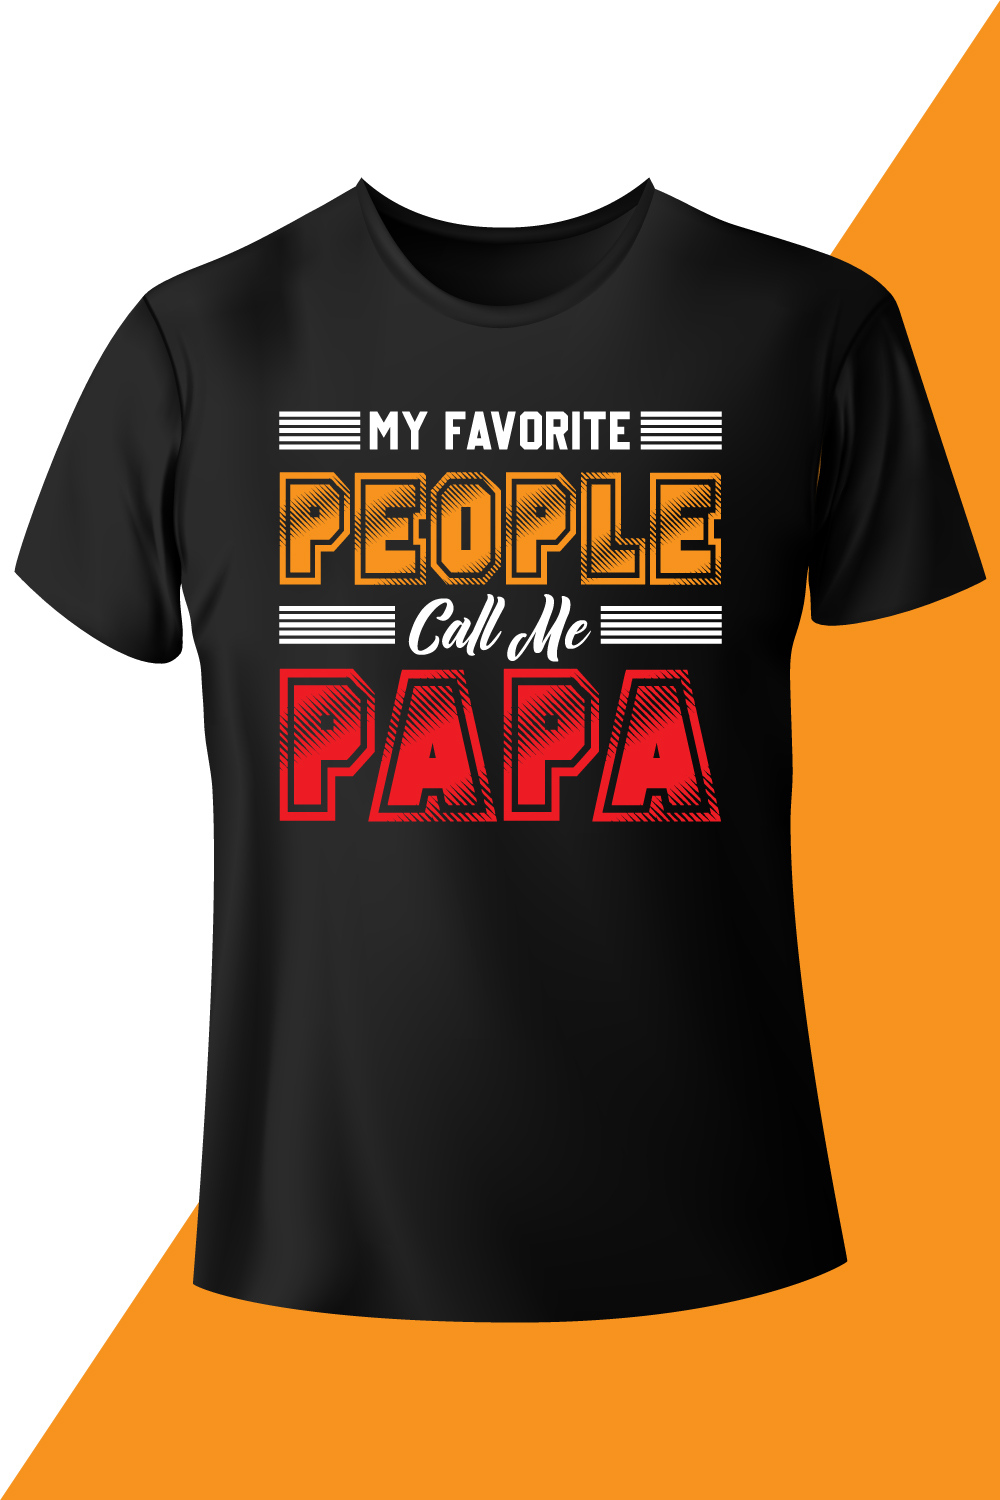 Image of a black t-shirt with a beautiful inscription my favorite people call me papa.